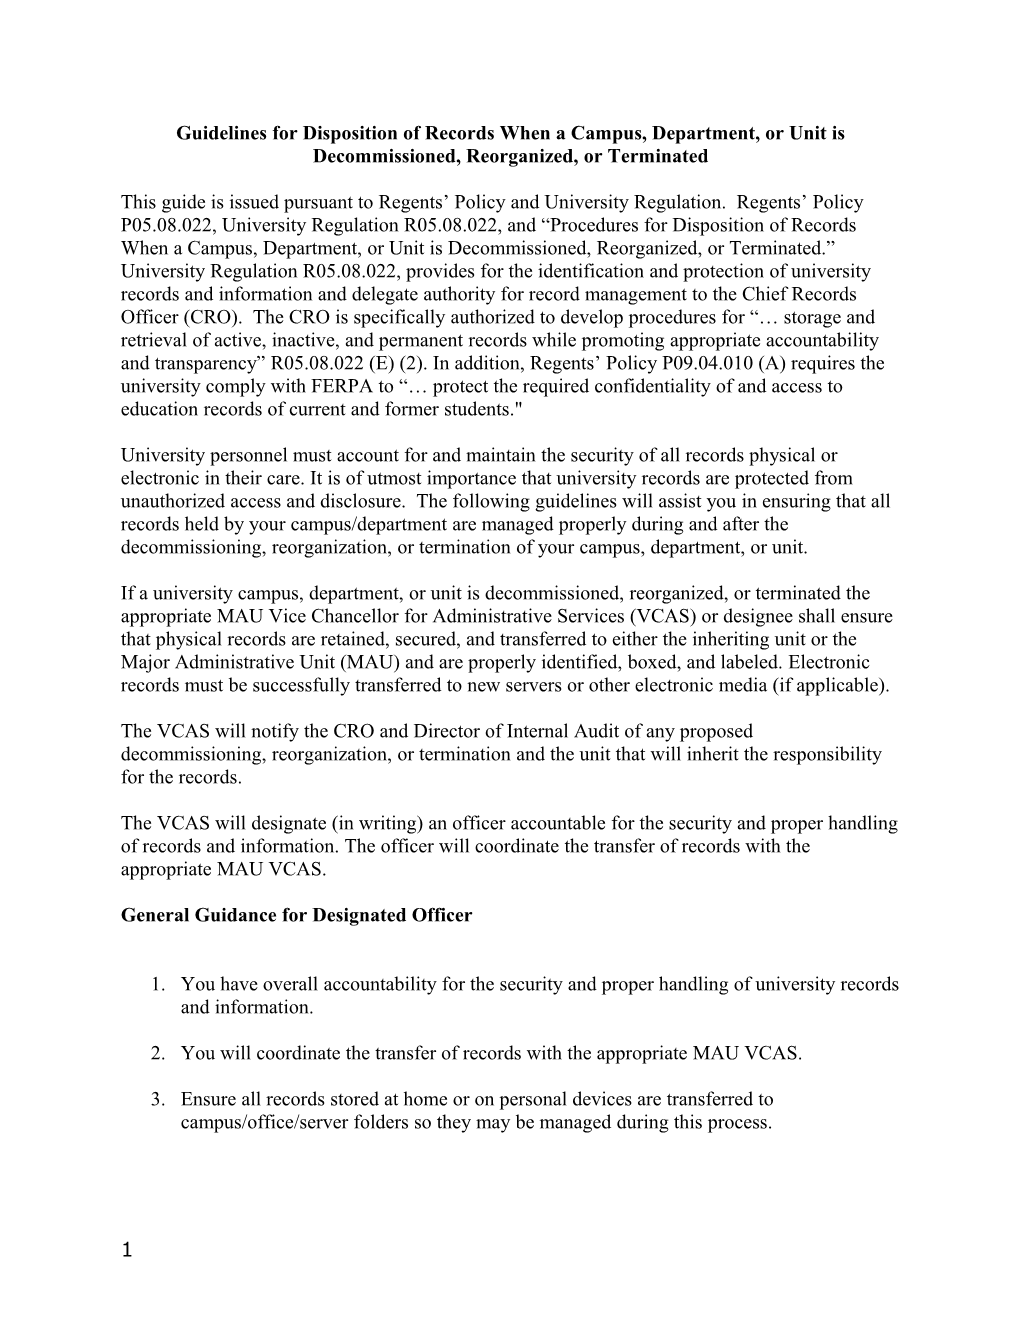 Guidelines for Disposition of Records When a Campus, Department, Or Unit Isdecommissioned